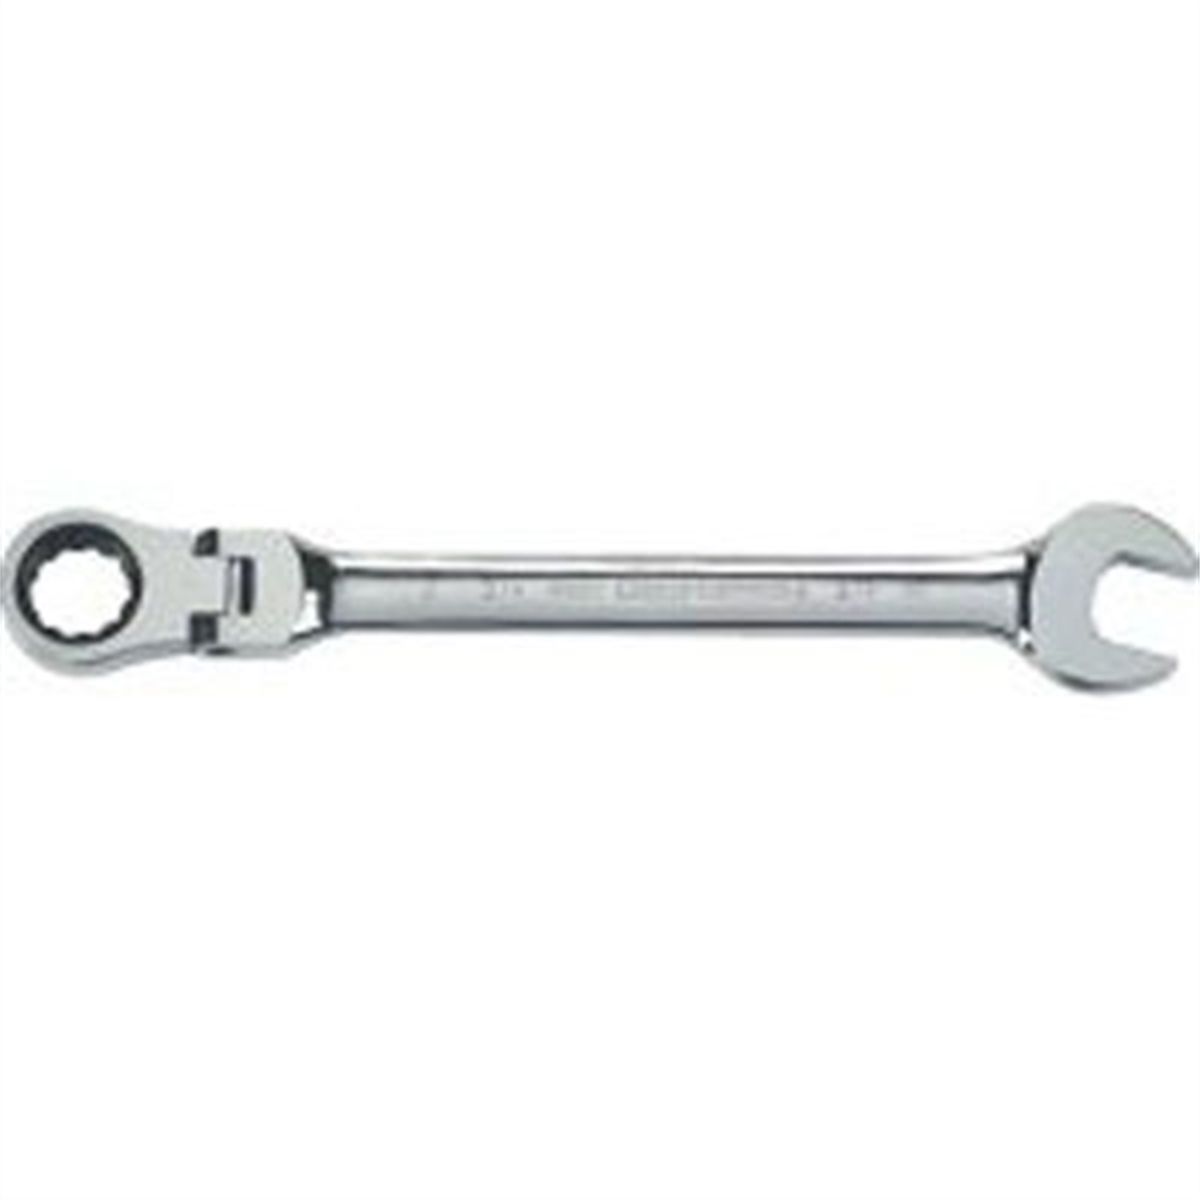 5/8" Flex Combination Ratcheting Wrench